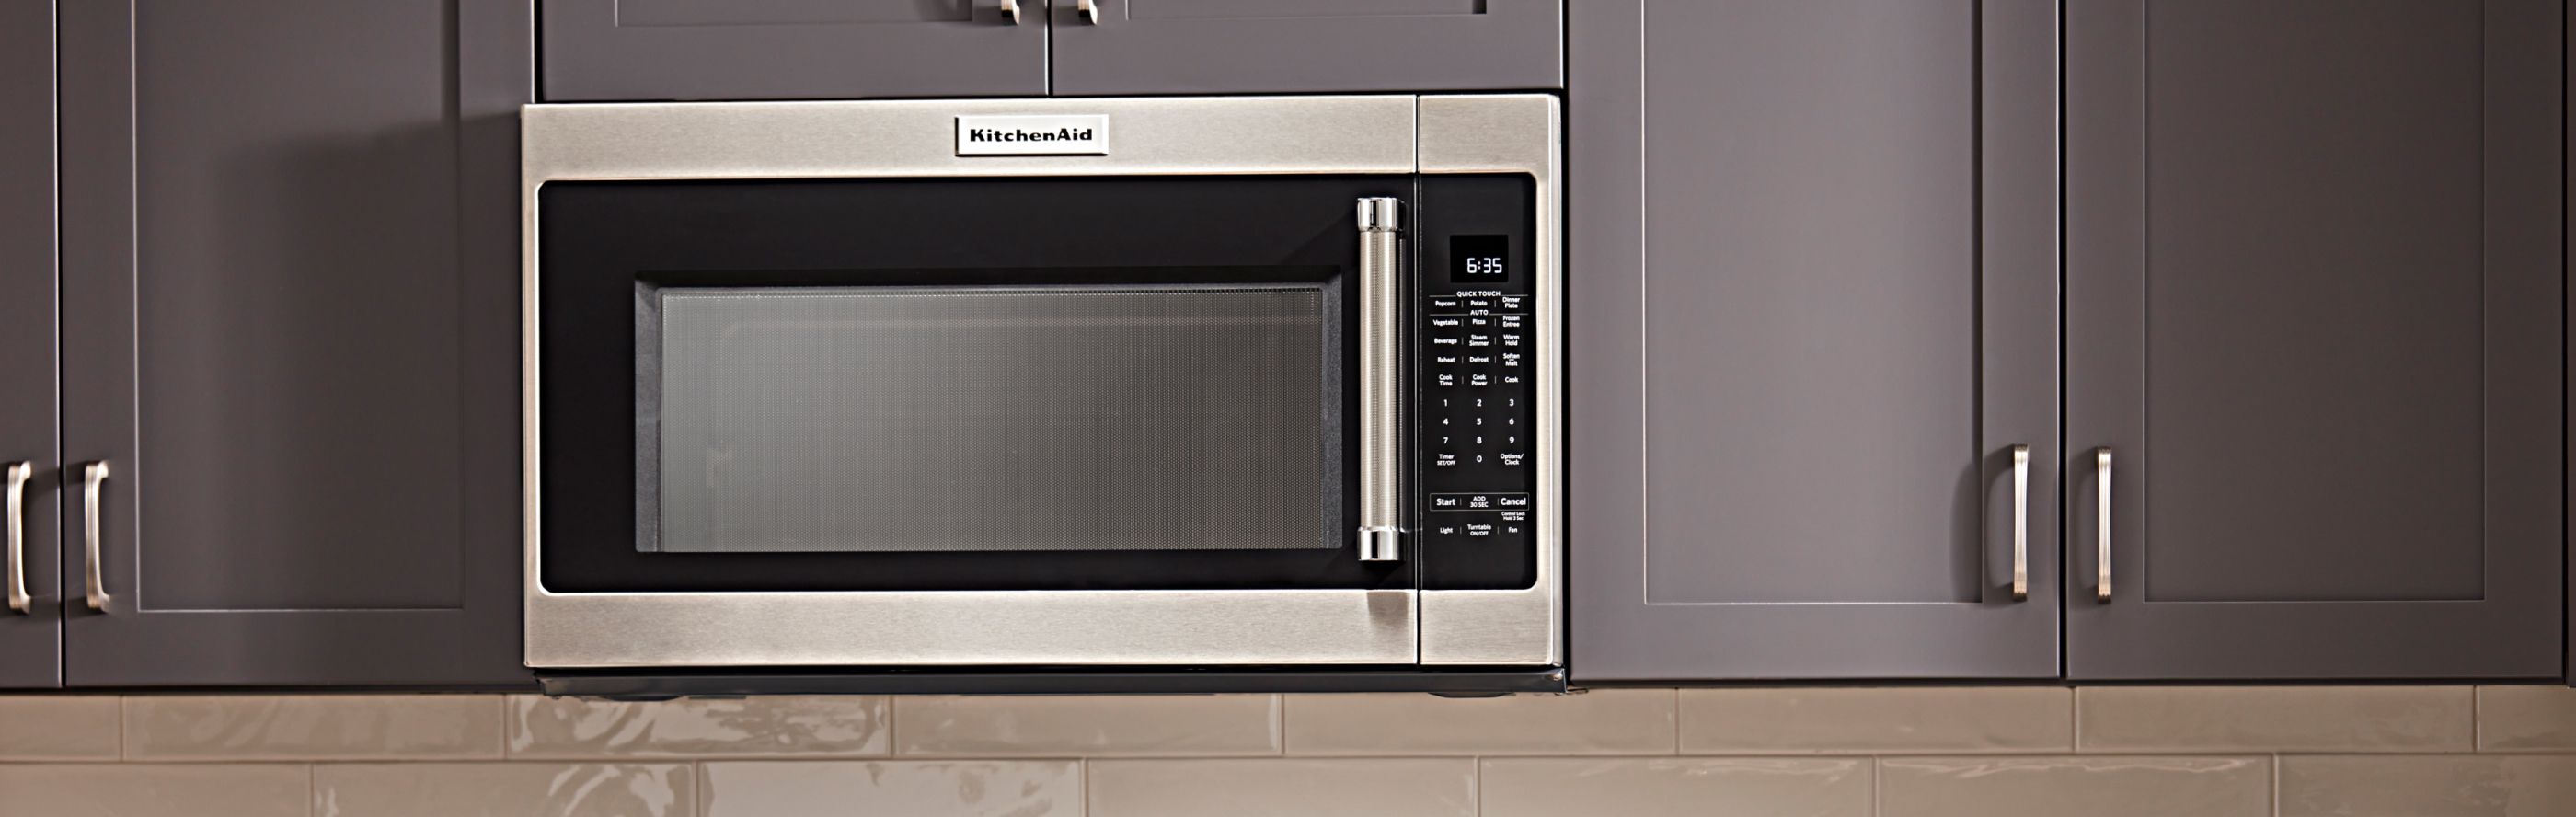 Over-the-range microwave in grey cabinets